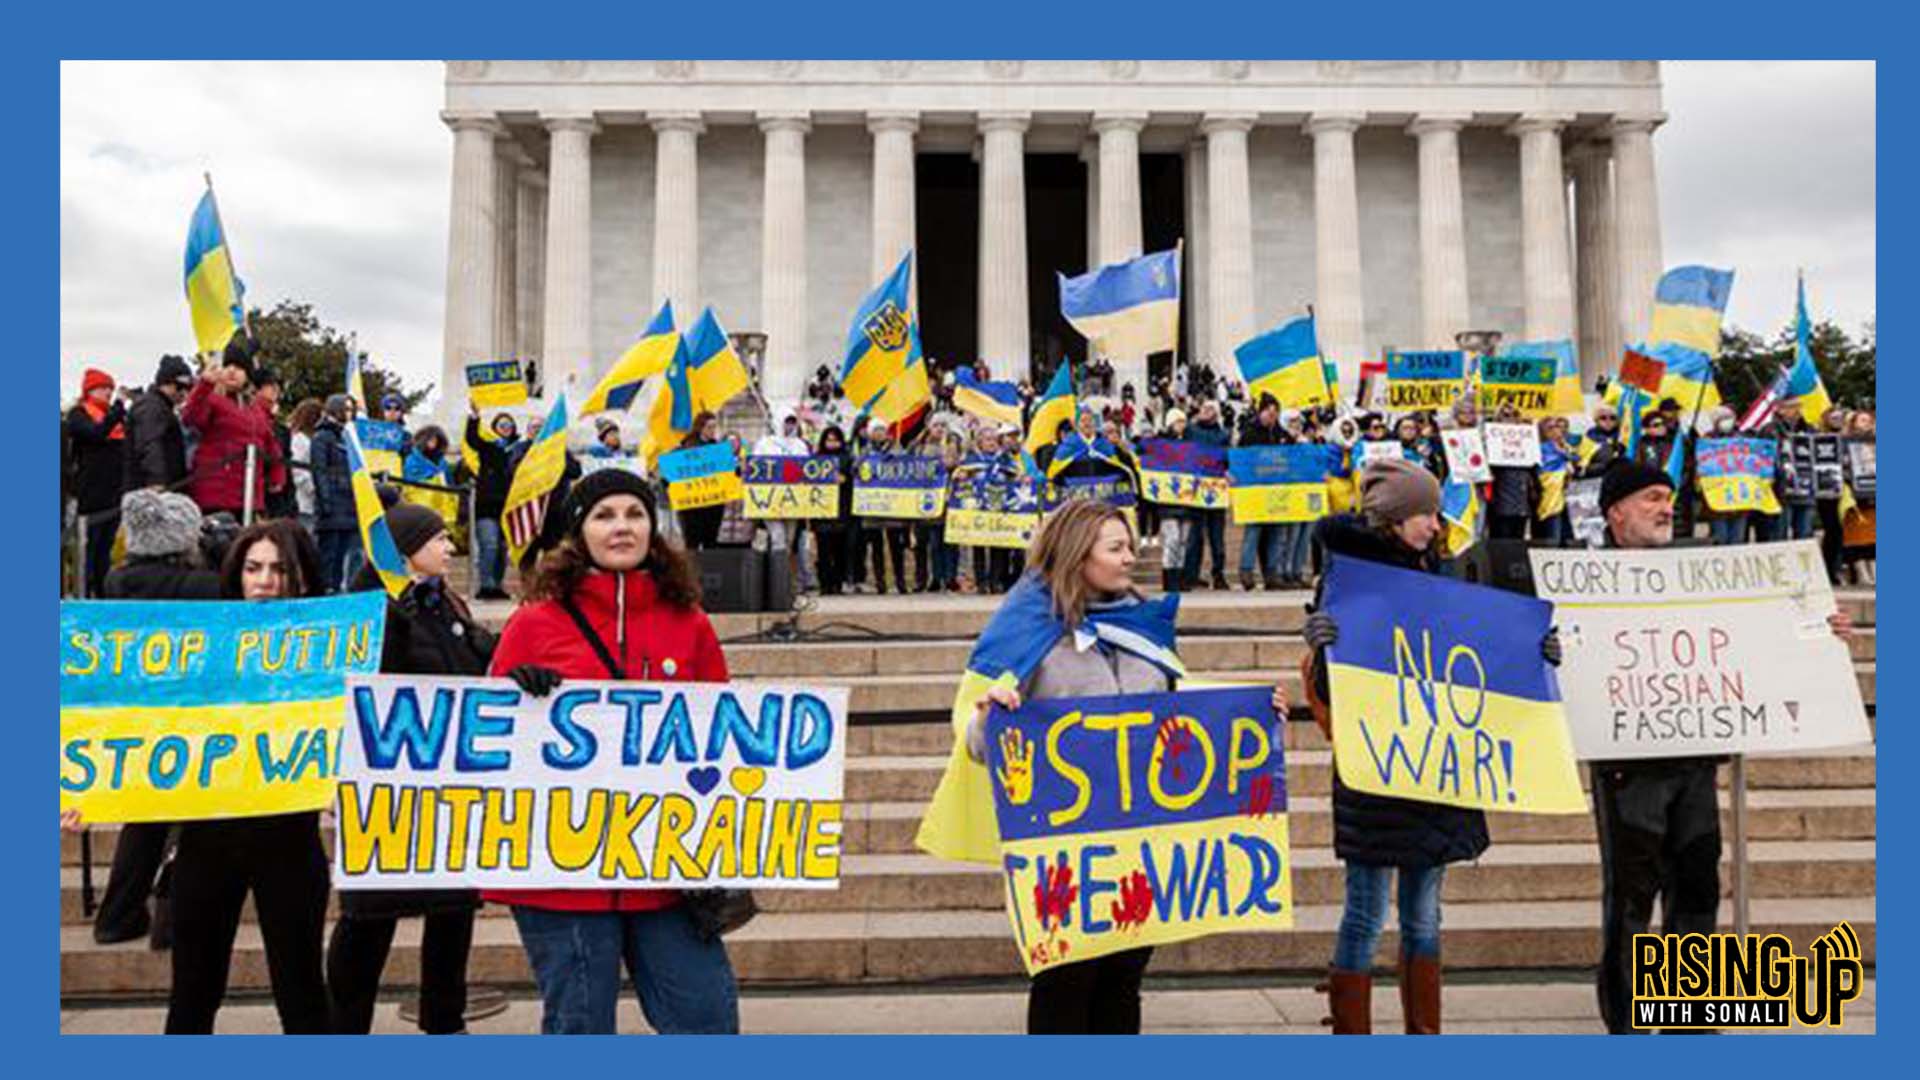 Why Do Some on the Left Excuse Russia’s Invasion of Ukraine?